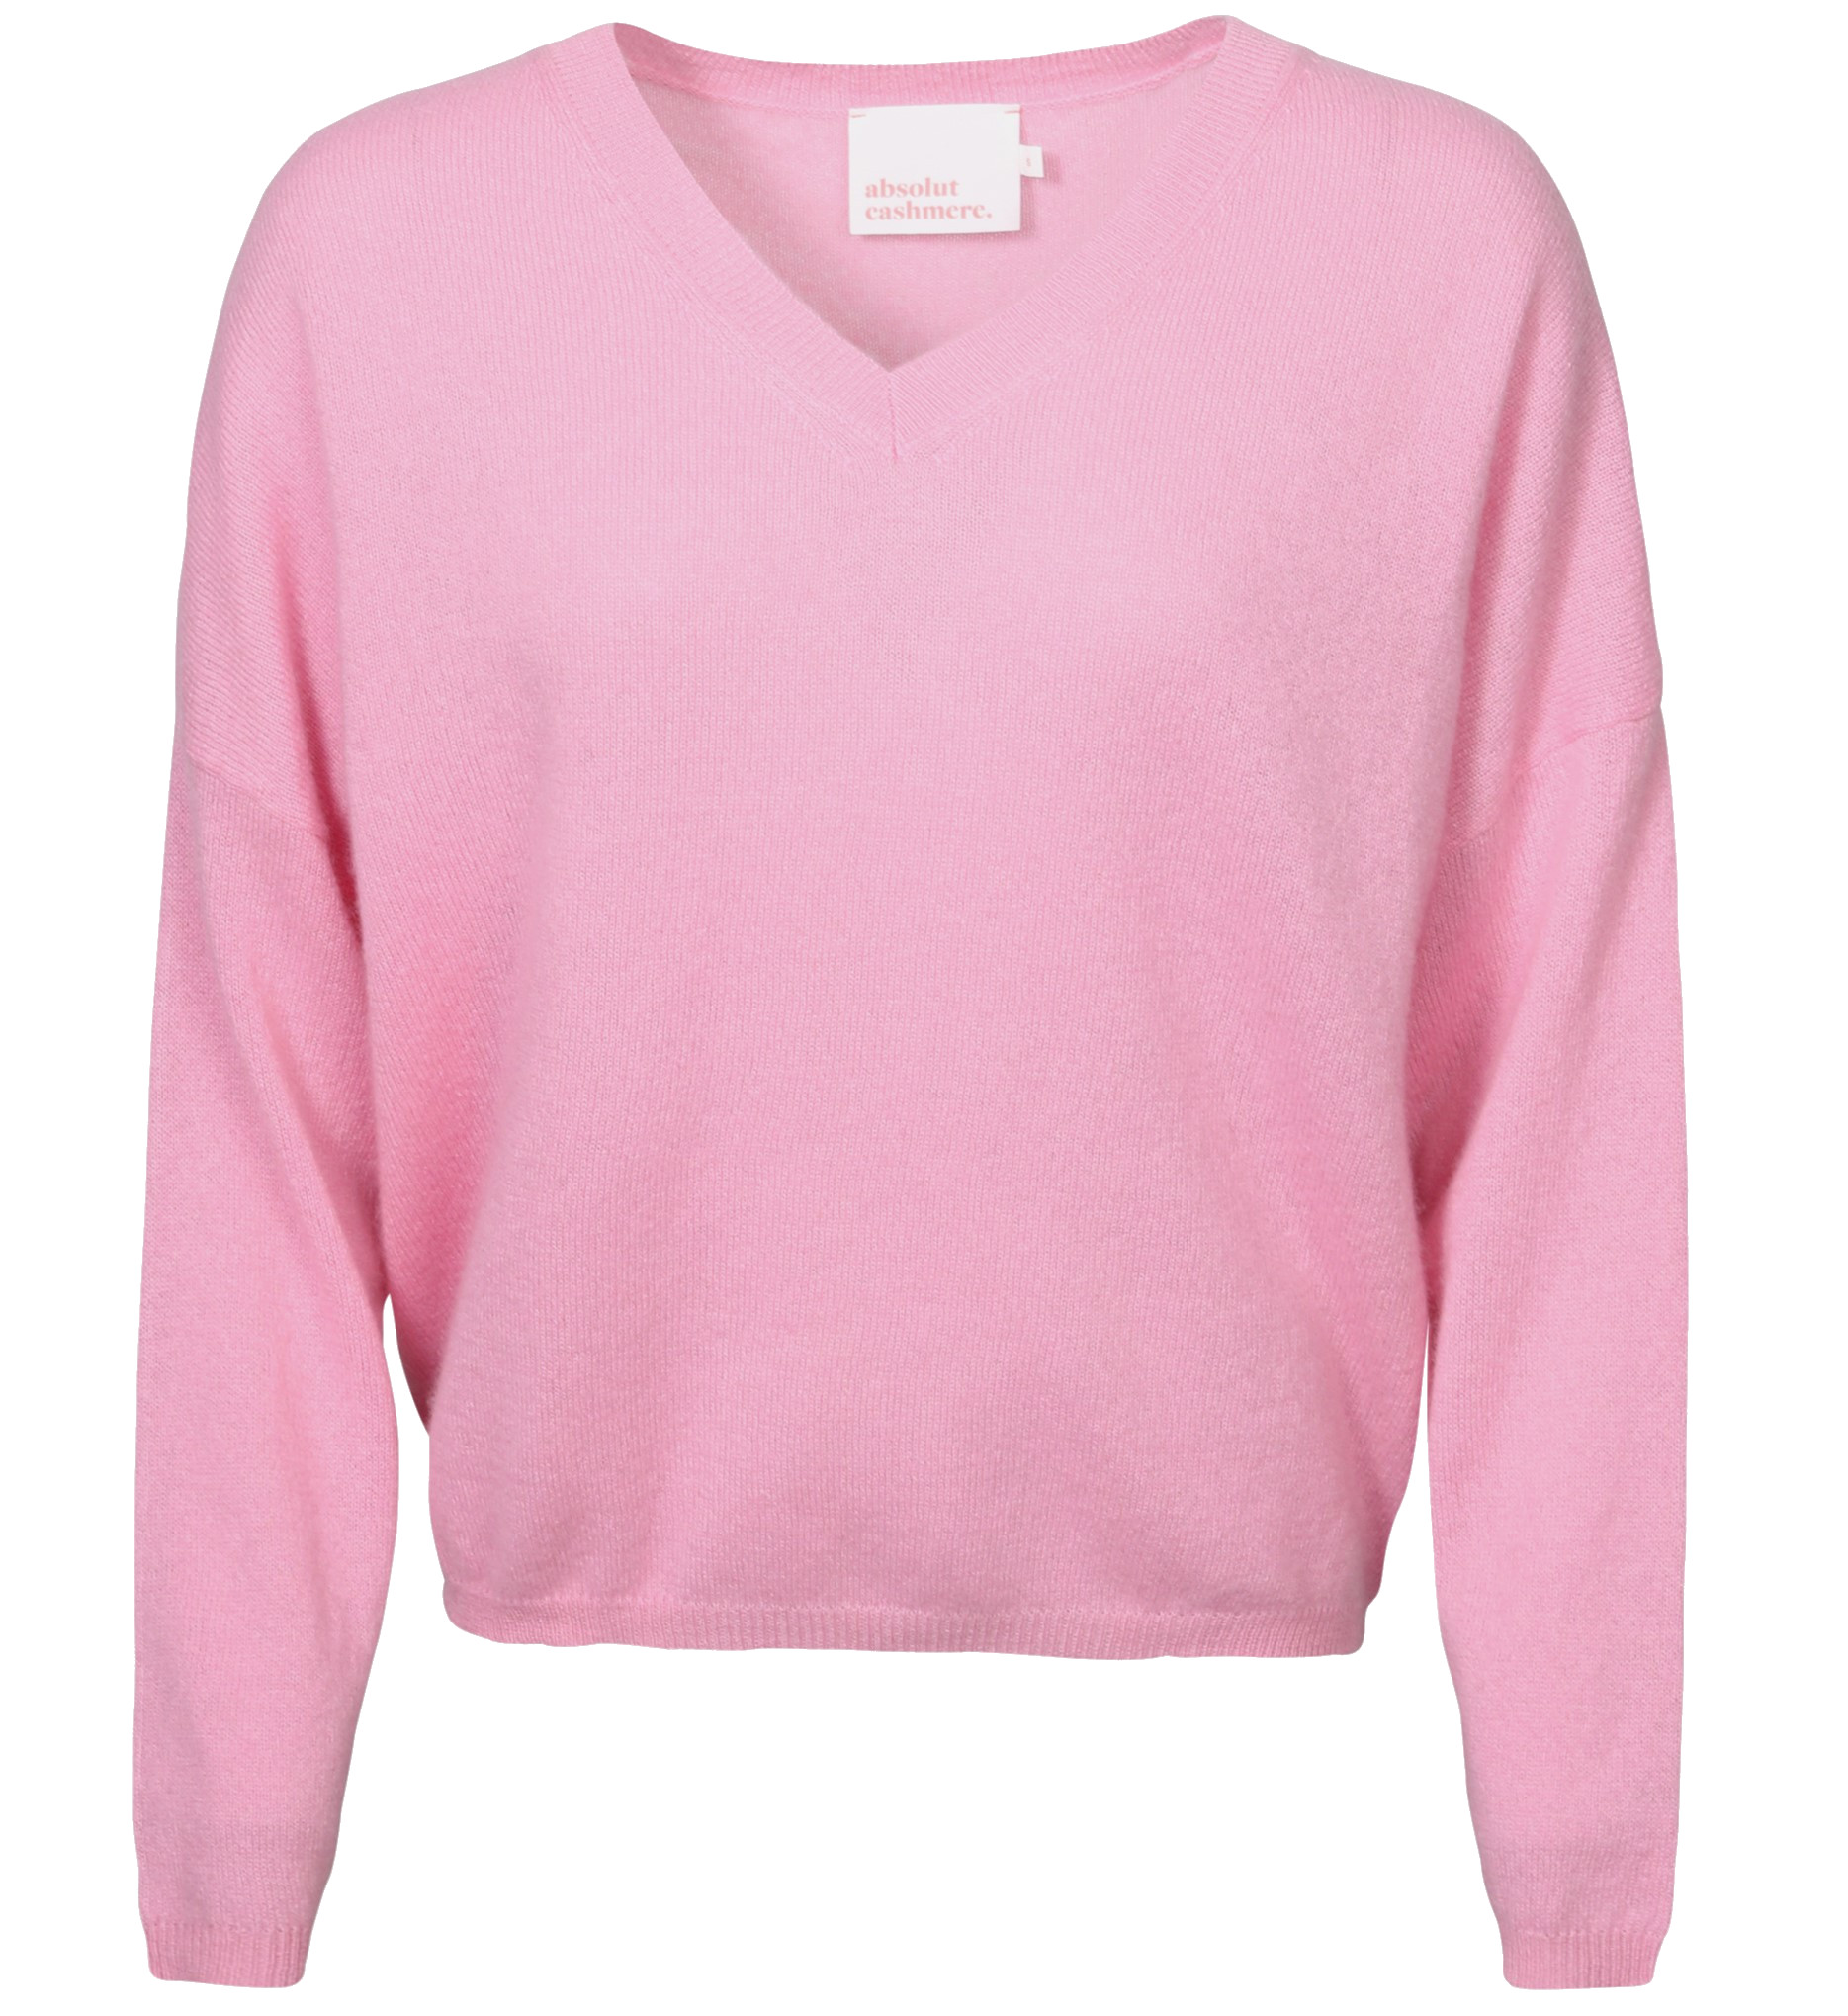 ABSOLUT CASHMERE V-Neck Sweater Alicia in Light Pink S